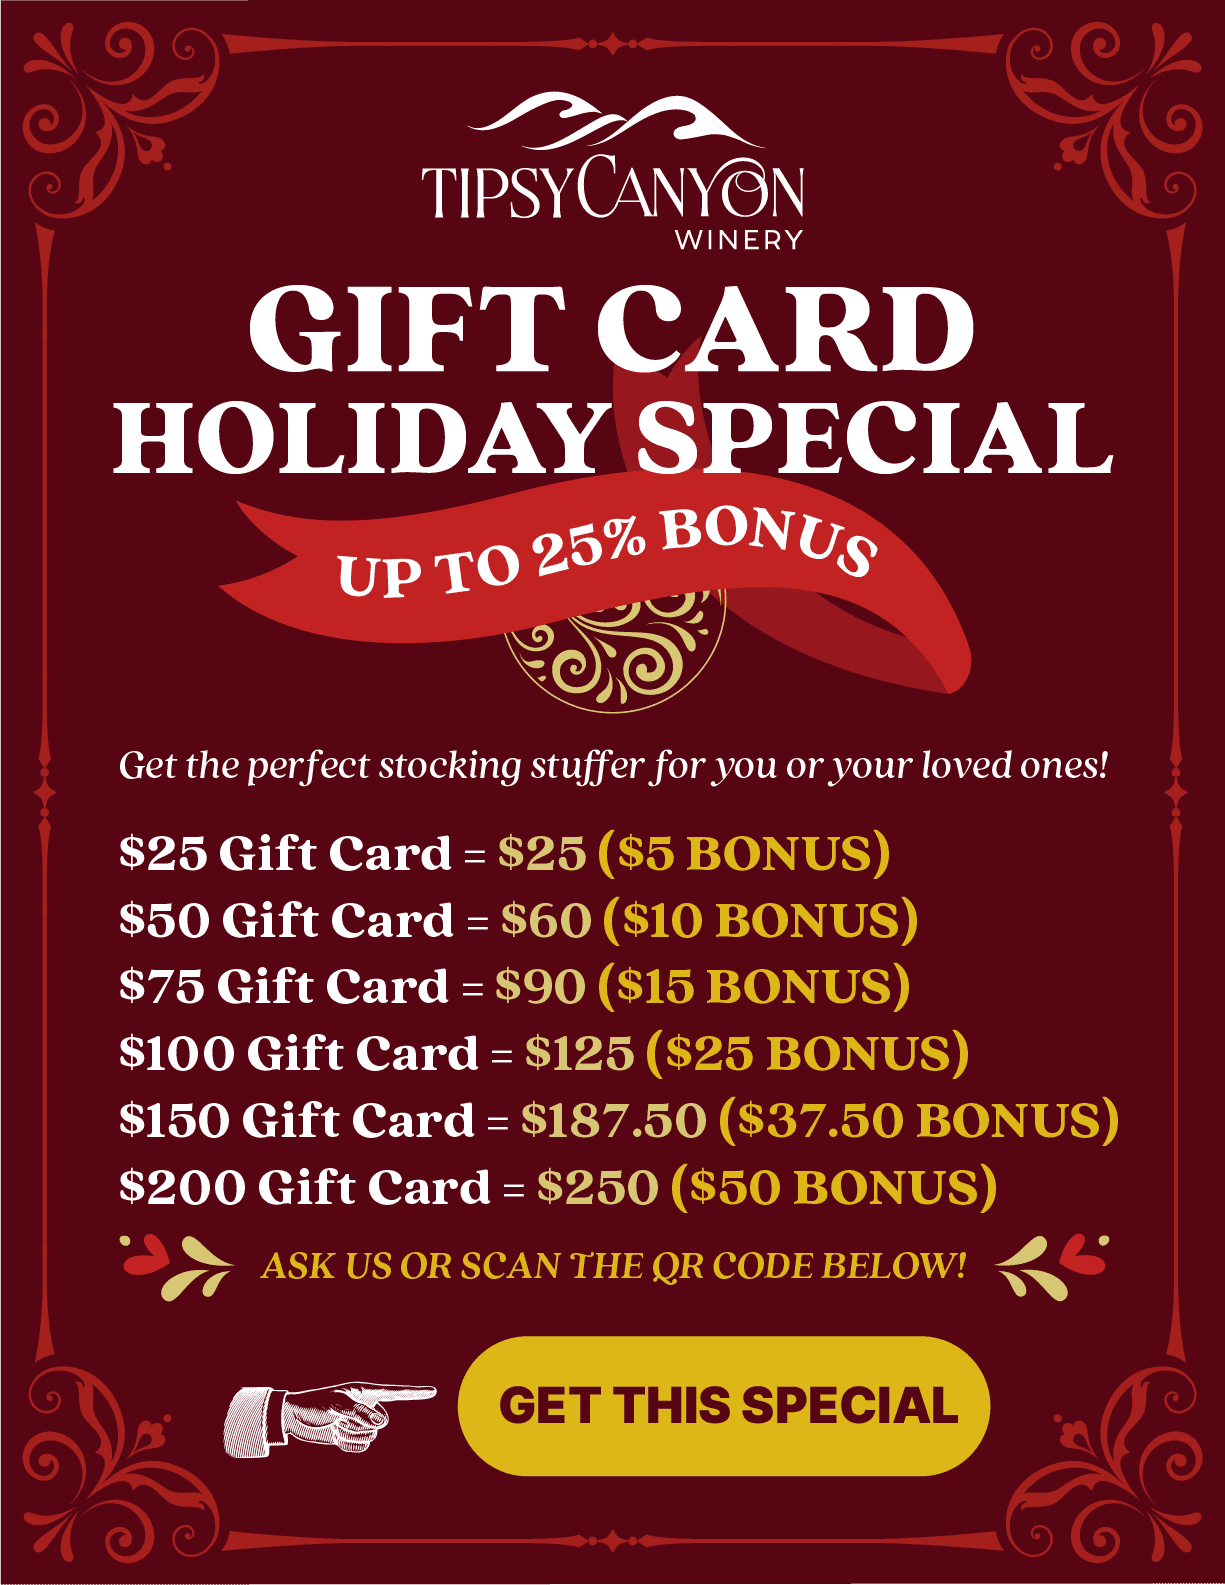 Gift card special